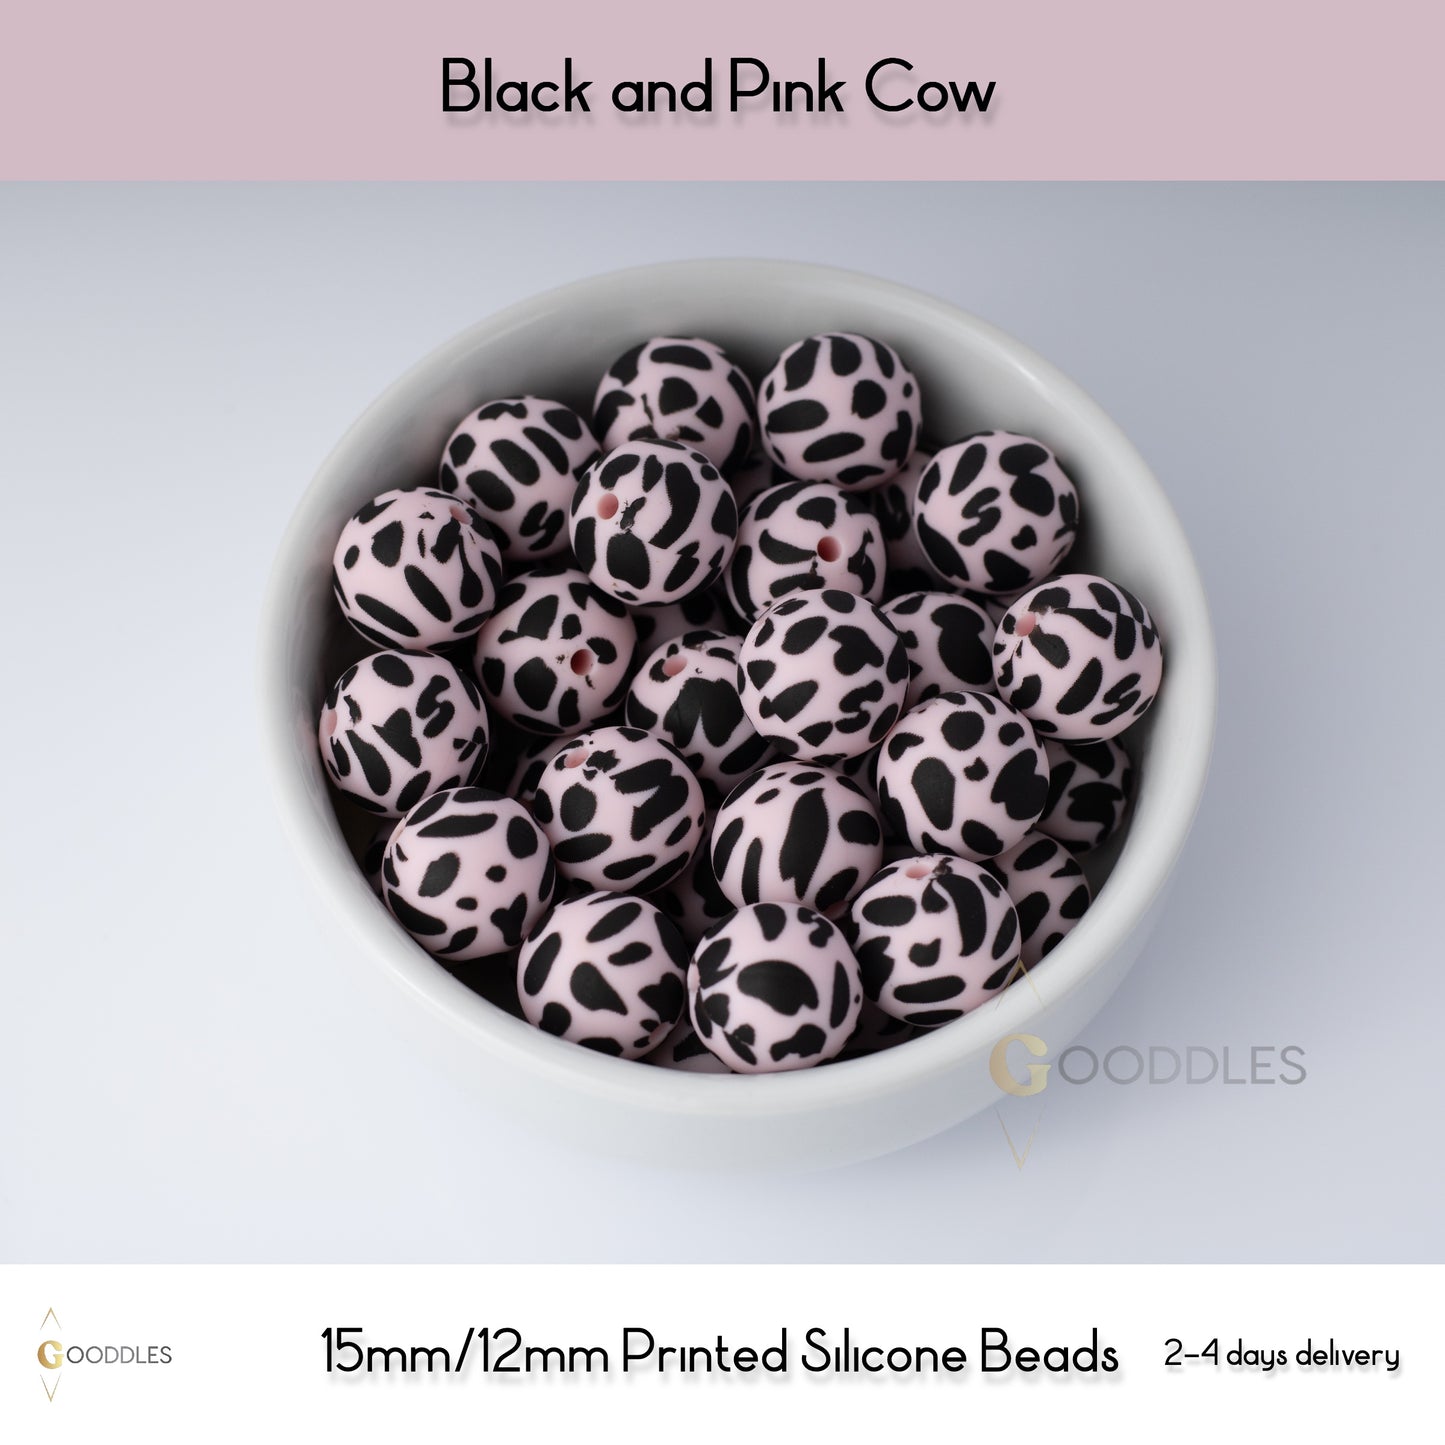 5pcs, Black and Pink Cow Silicone Beads Printed Round Silicone Beads